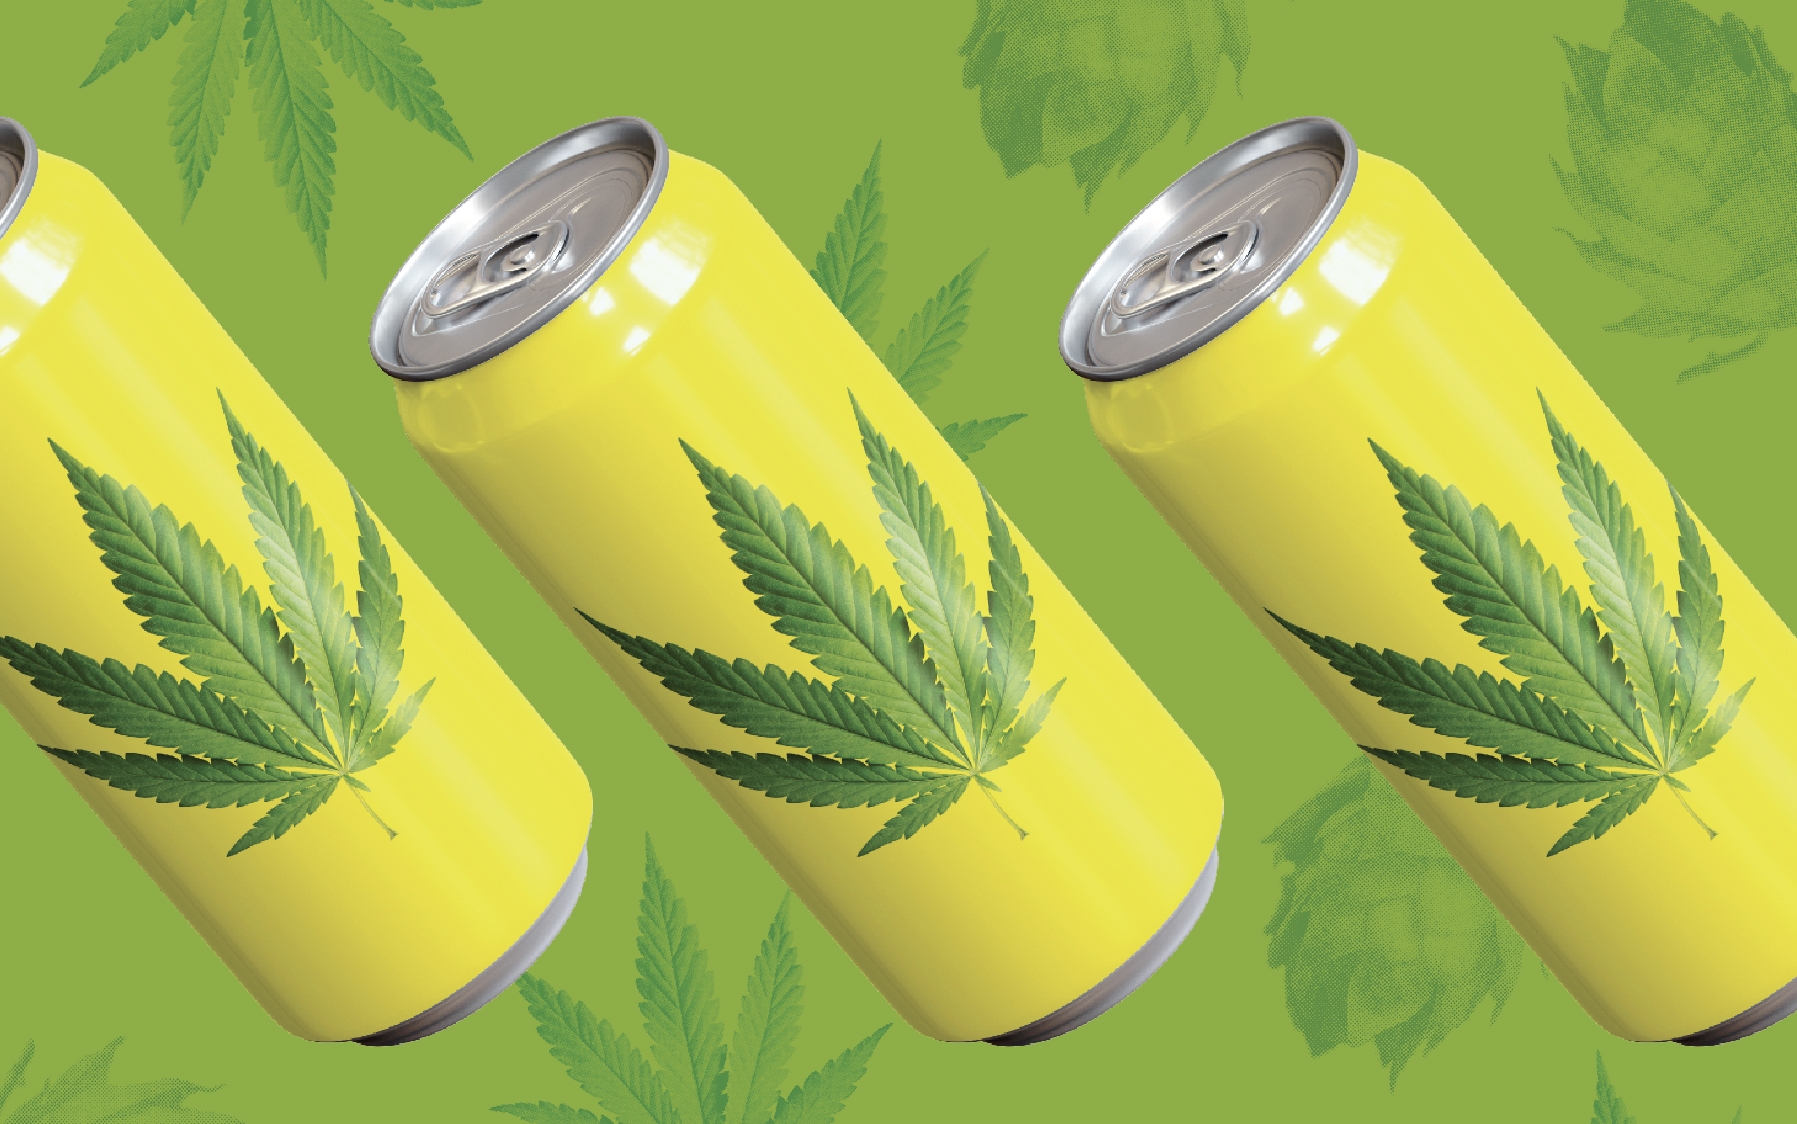 Buds and Beer: Beer and cannabis is a ‘natural partnership’ for some breweries